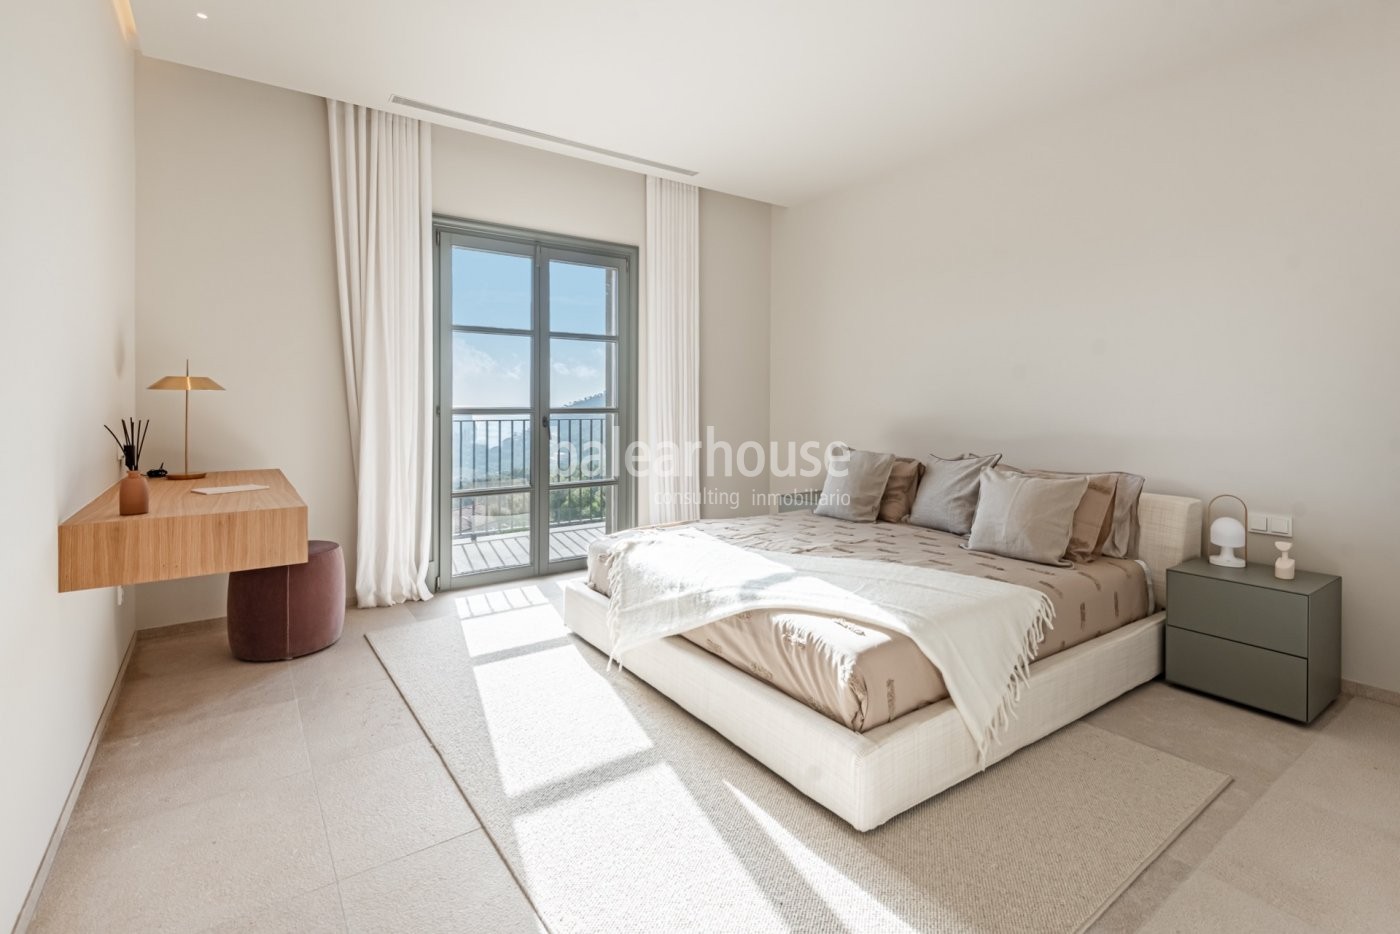 Light, design and well-being with beautiful sea views in this large villa in Puerto de Andratx.